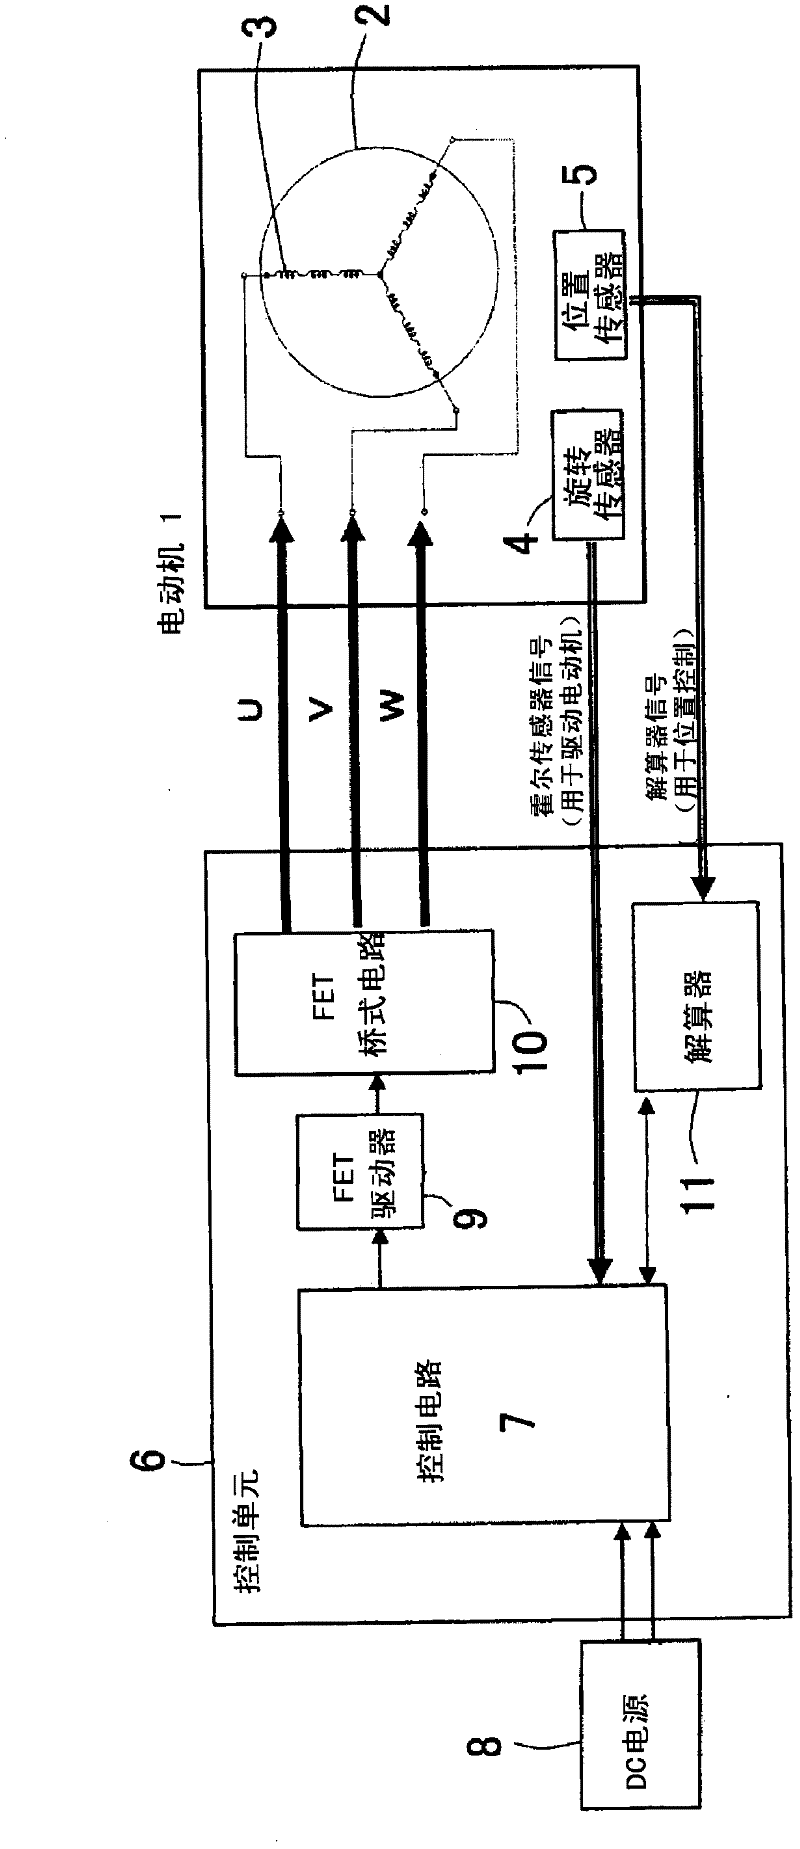 Method for driving and controlling an electric motor